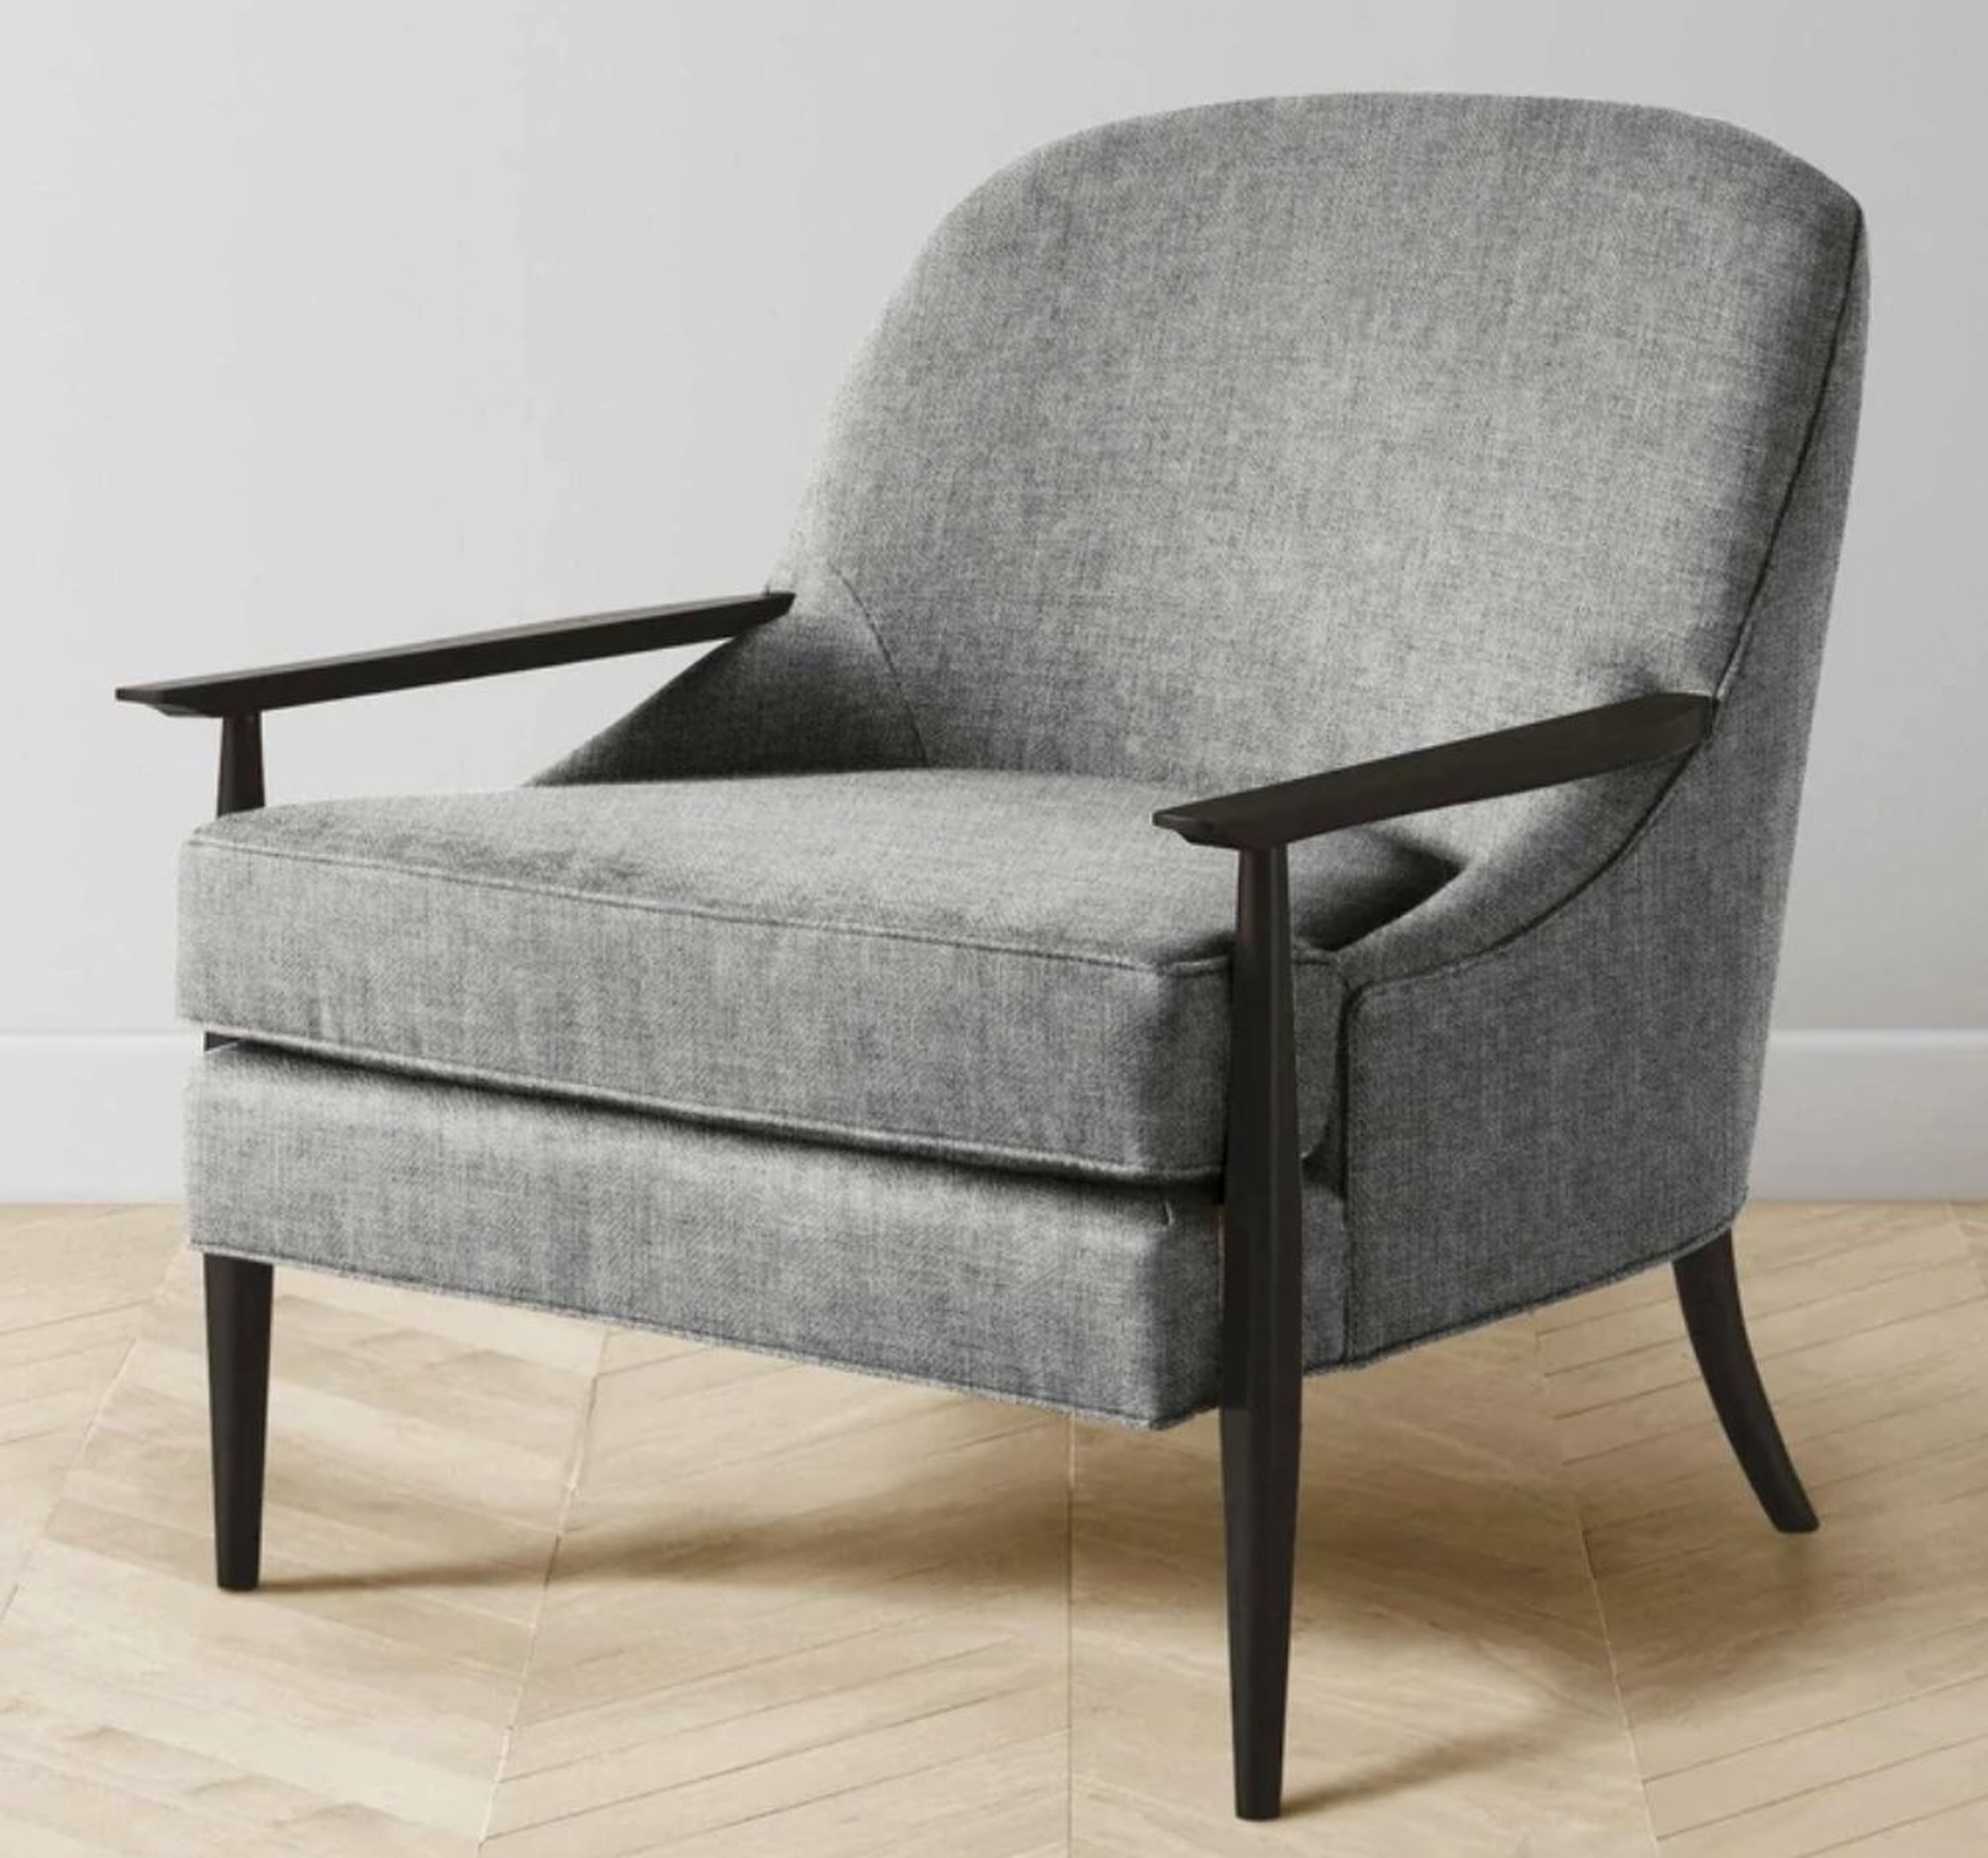 The Leroy chair - Maiden Home